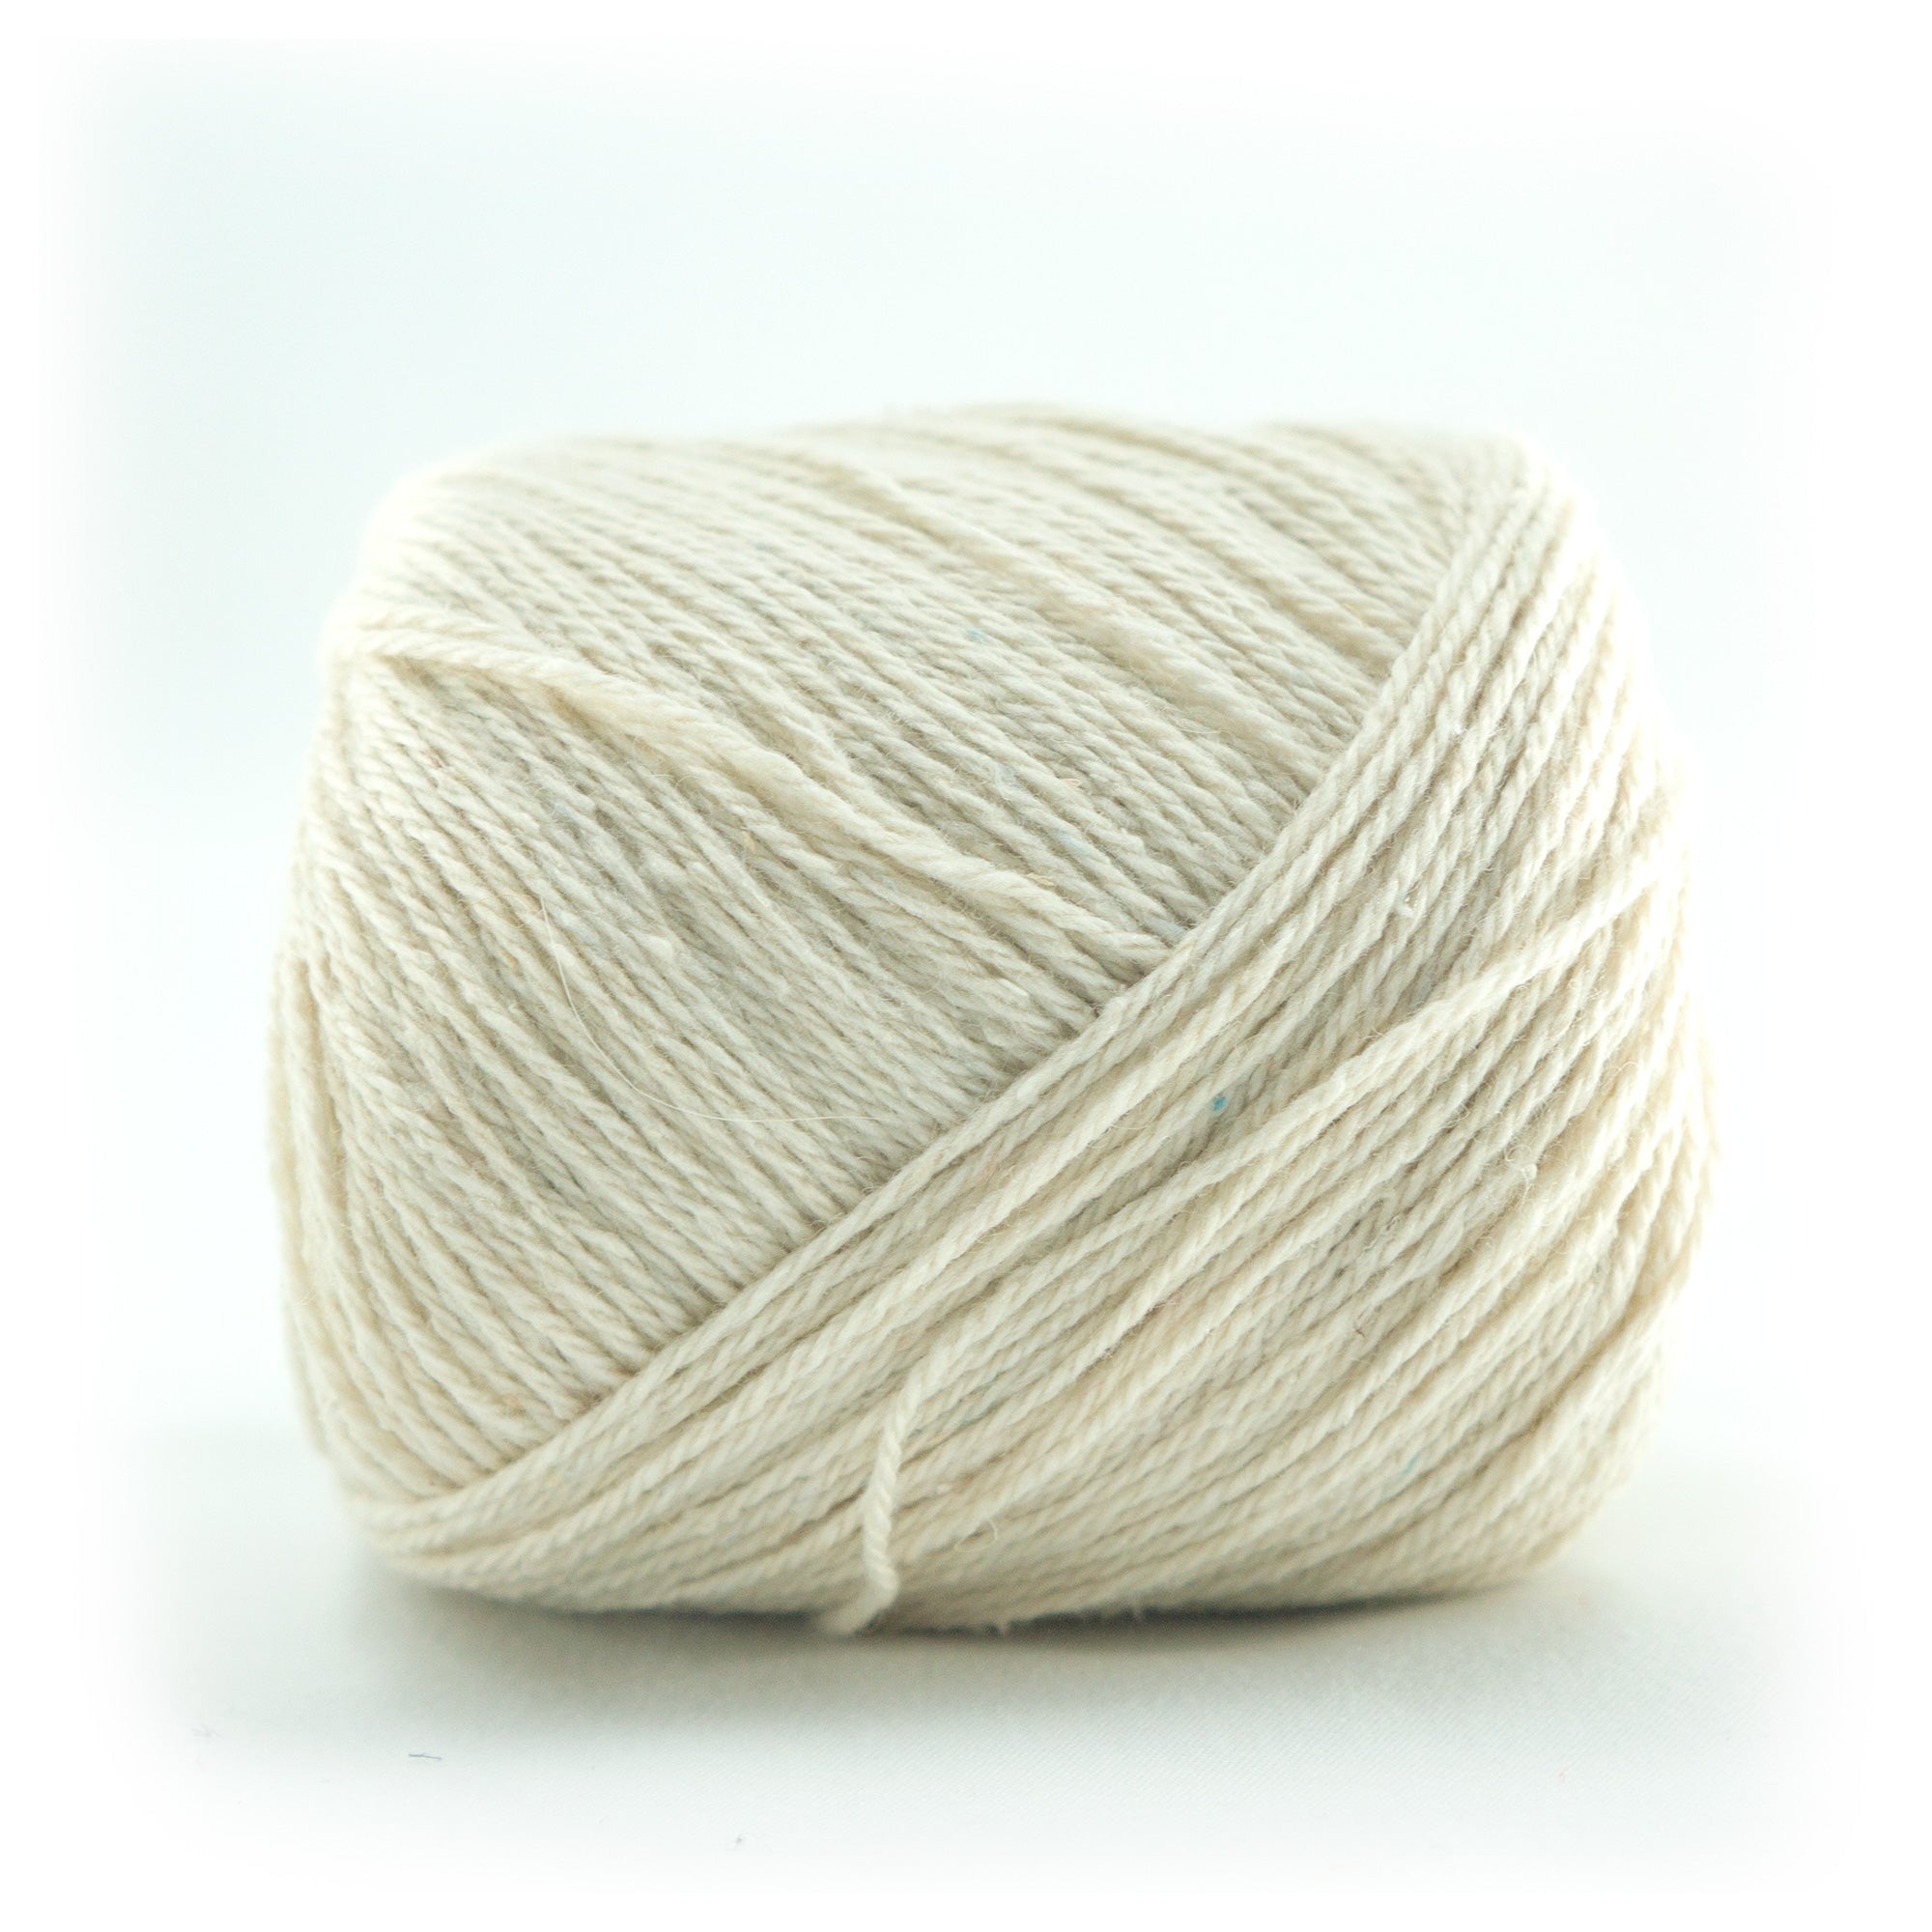 Cantaloupe- 100% Organic Cotton, Hand Dyed, Hand painted, Cotton Yarn, Worsted  Weight